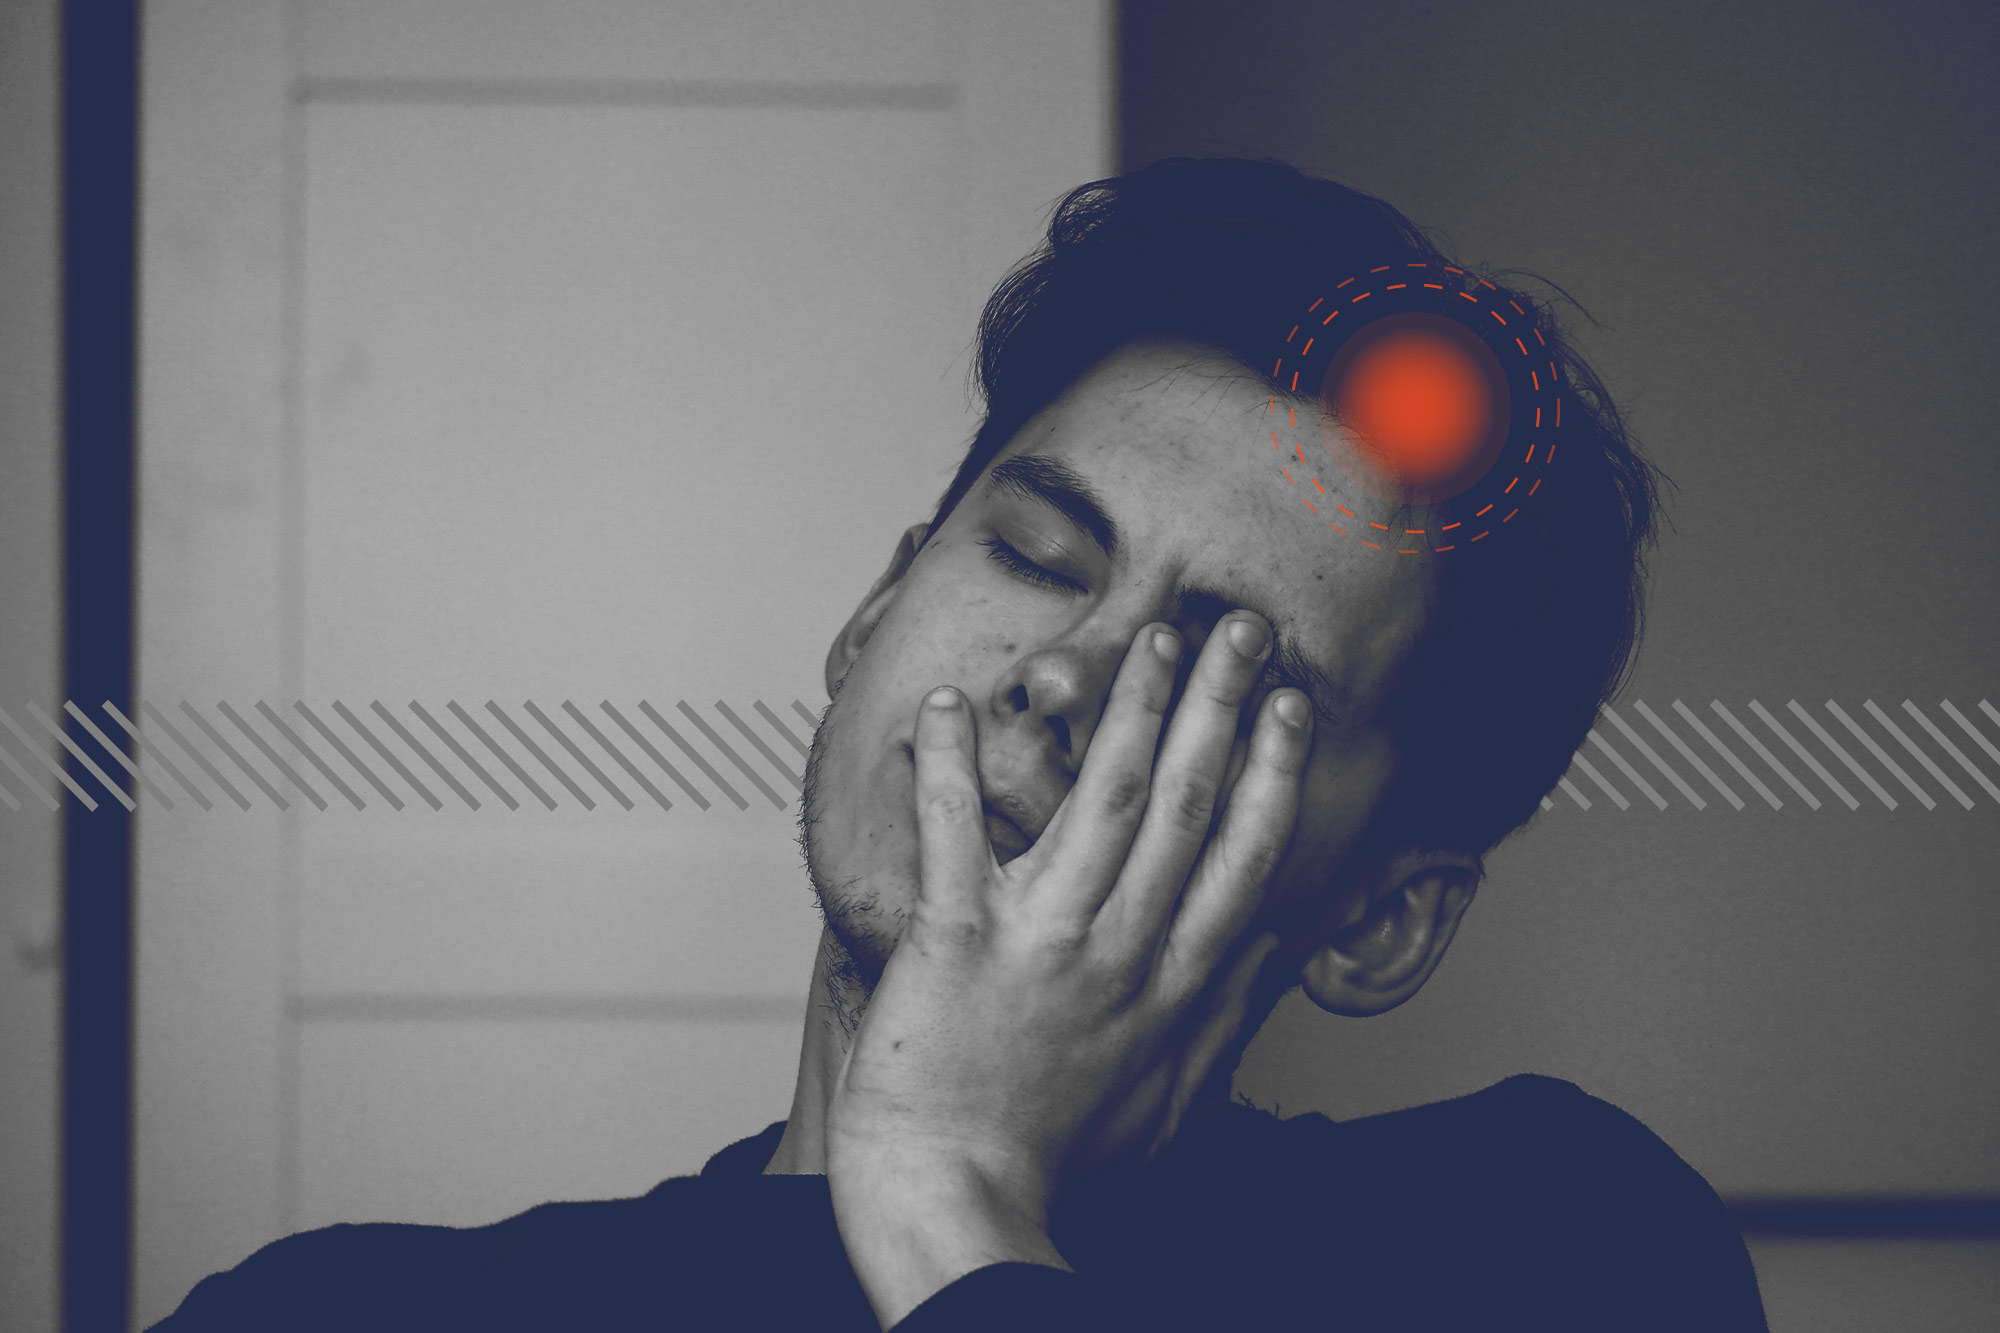 A man leans his face on his hand in apparent pain. A red dot on his head signaling pain.